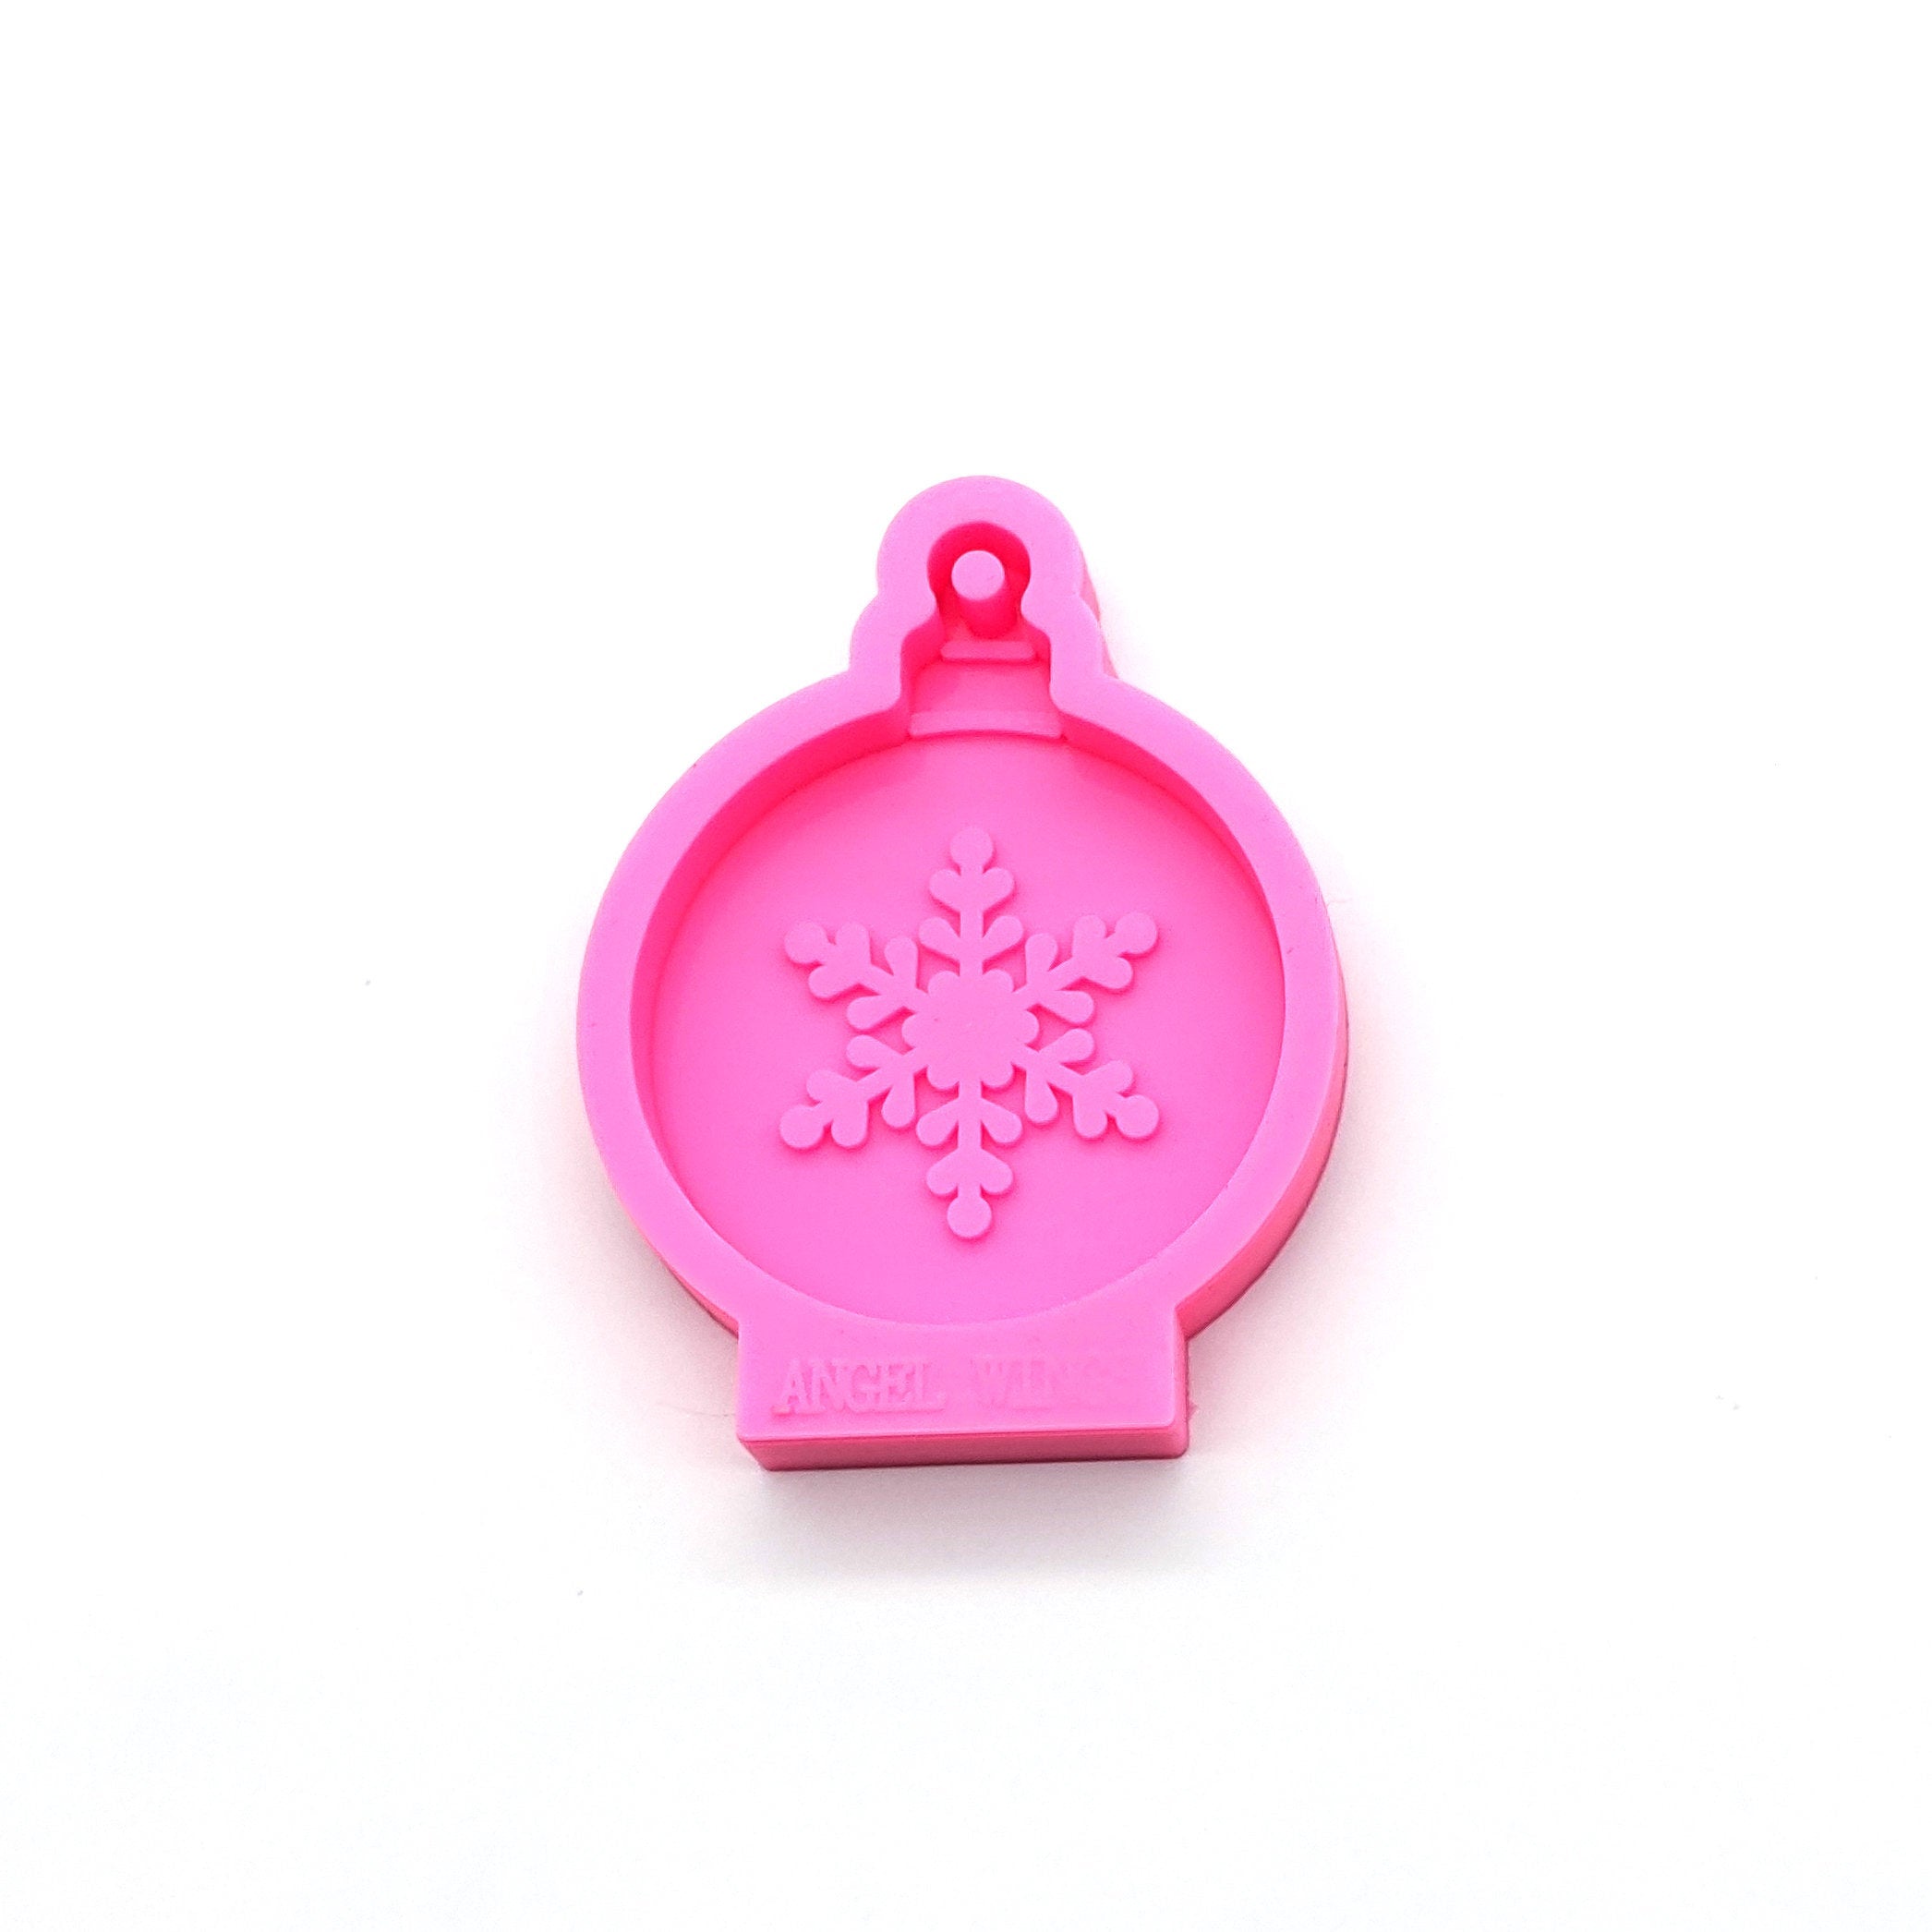 Ornament with Snowflake Shiny Silicone Mold